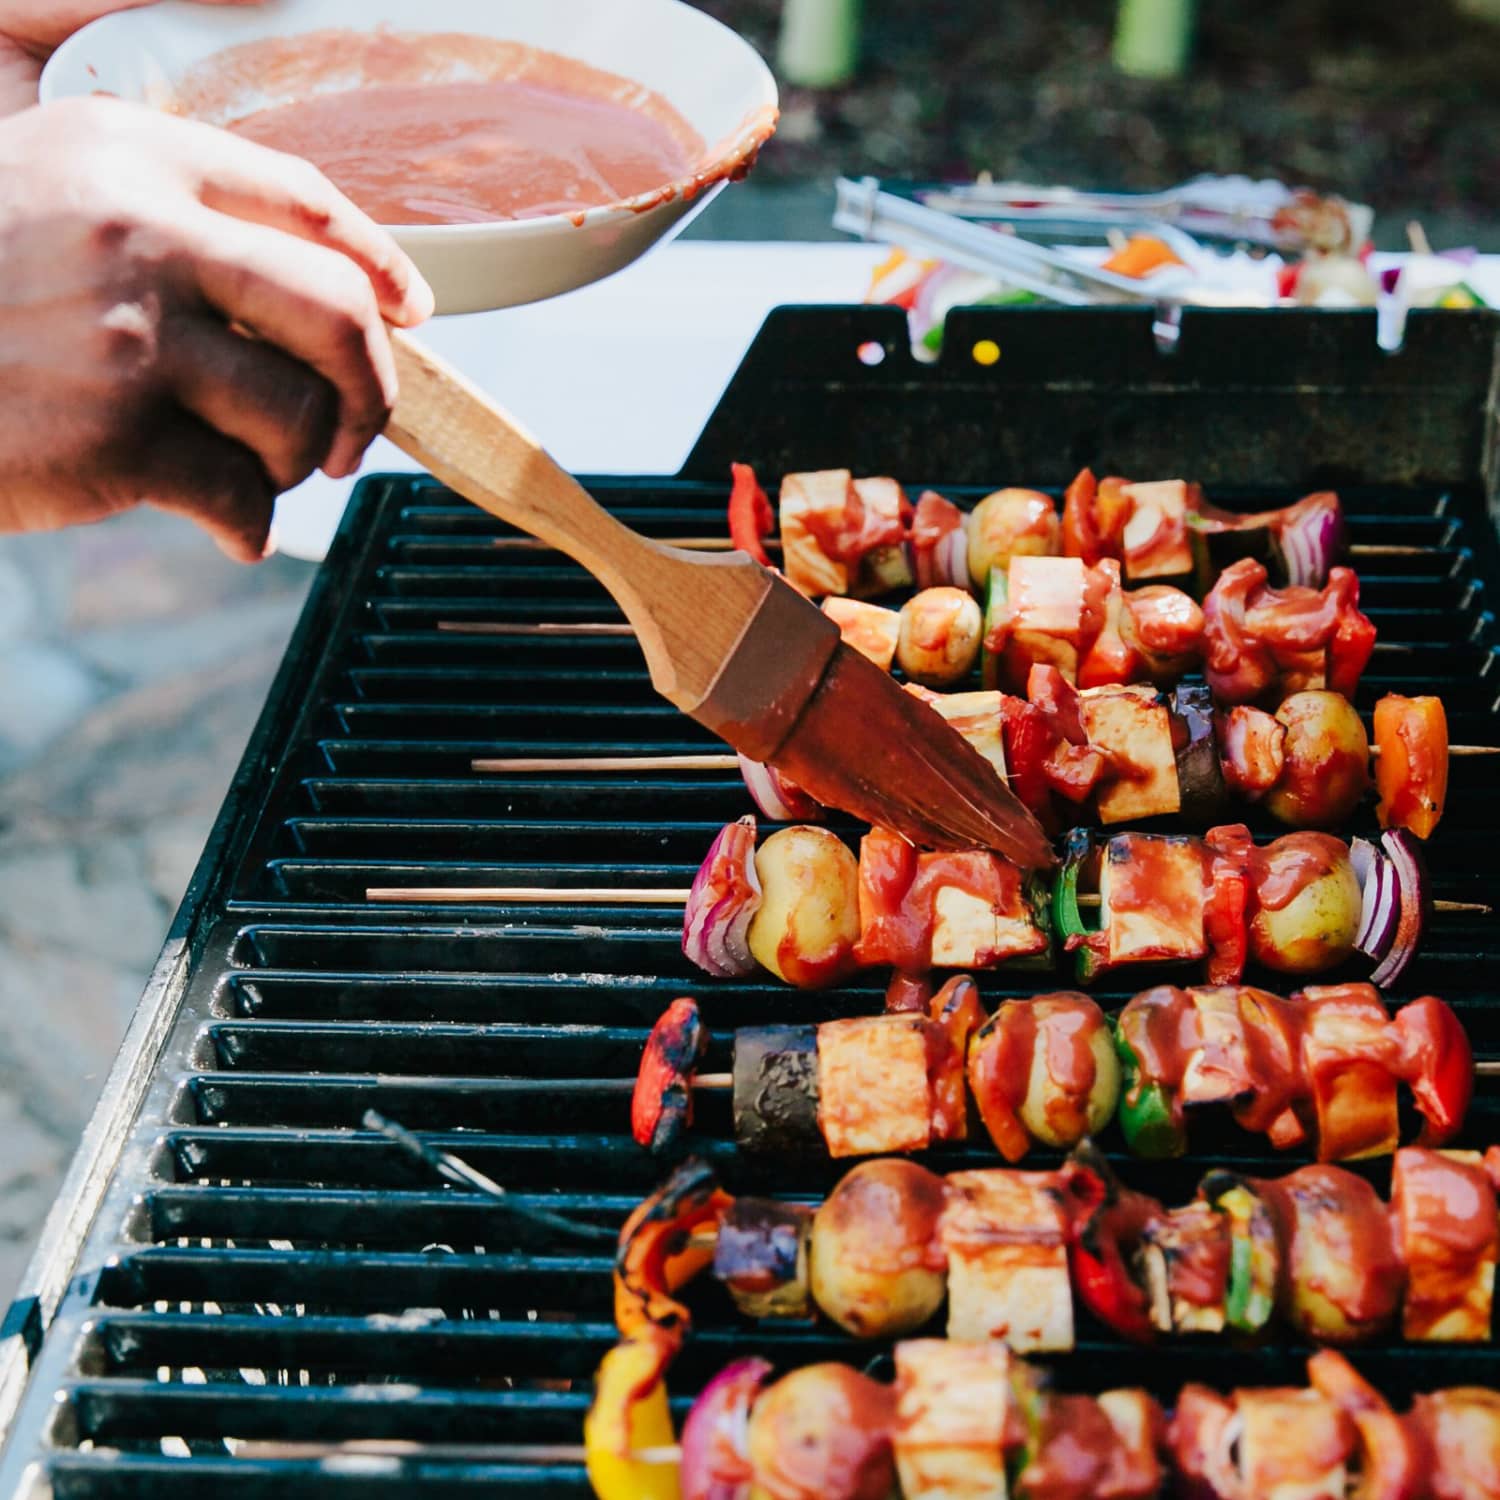 Make BBQ season last all year with 2-in-1 healthy grilling indoors